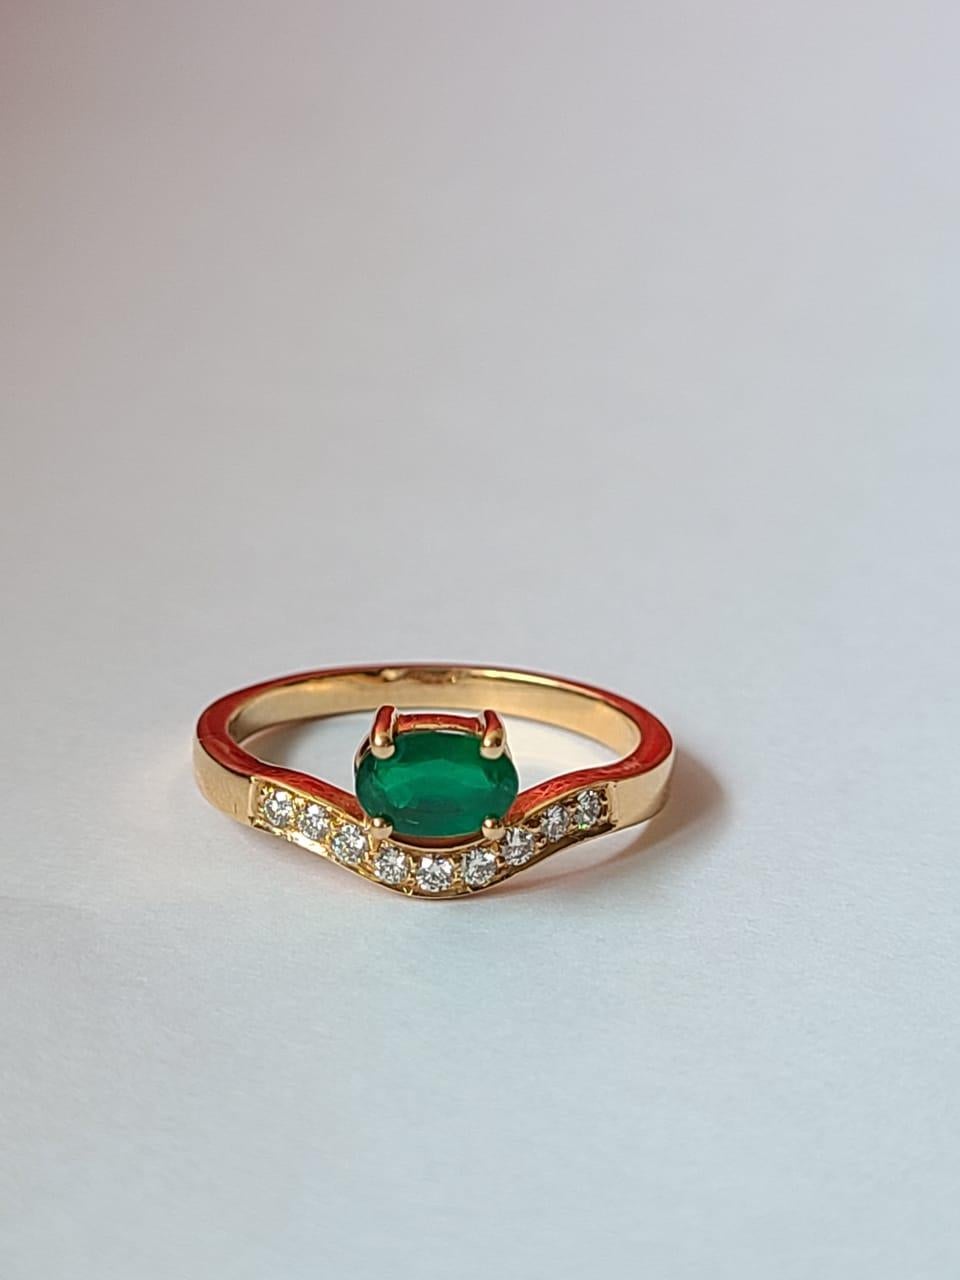 Women's or Men's Natural Zambian Emerald & Diamonds Engagement / Wedding Ring Set in 18K Gold For Sale